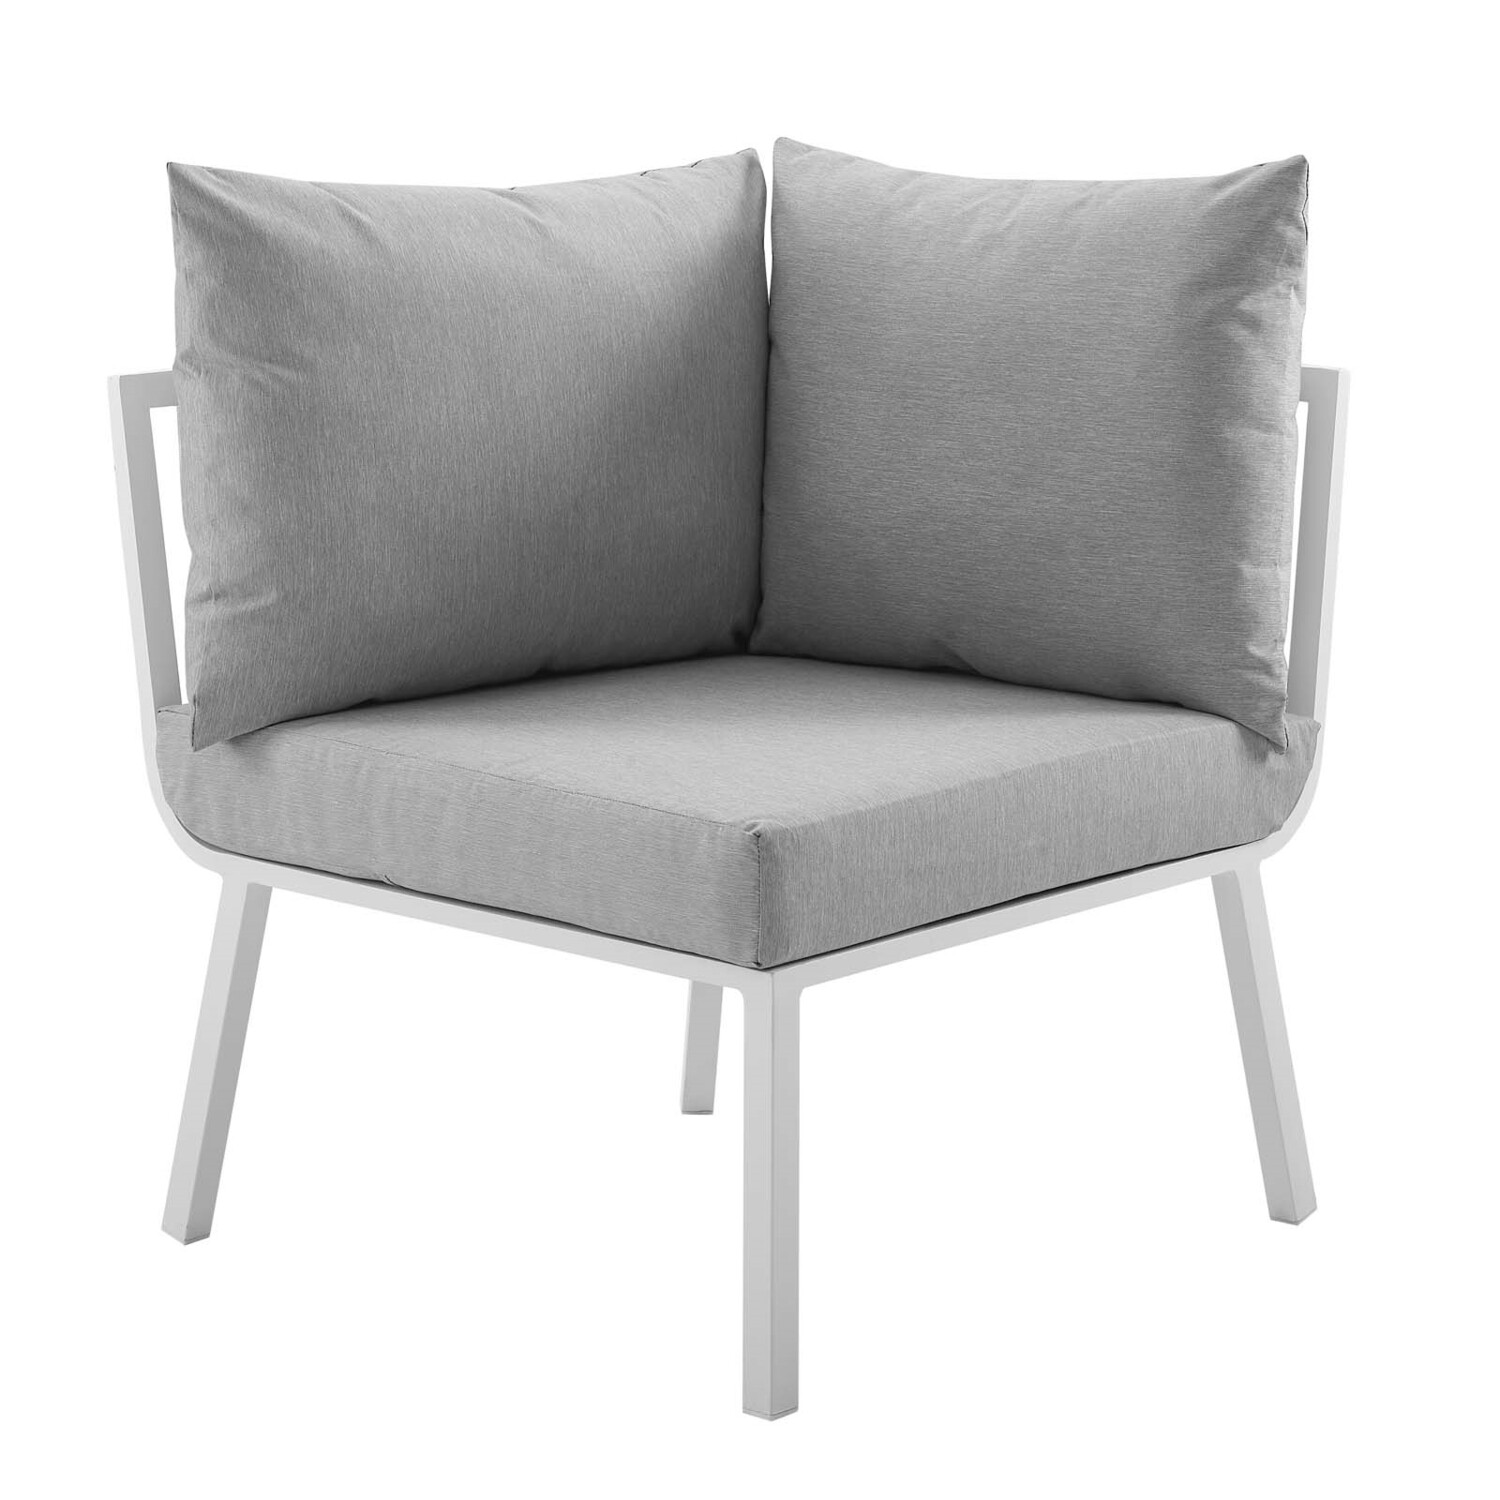 River North Patio Sectional Sofa Corner Chair | White Aluminum Frame